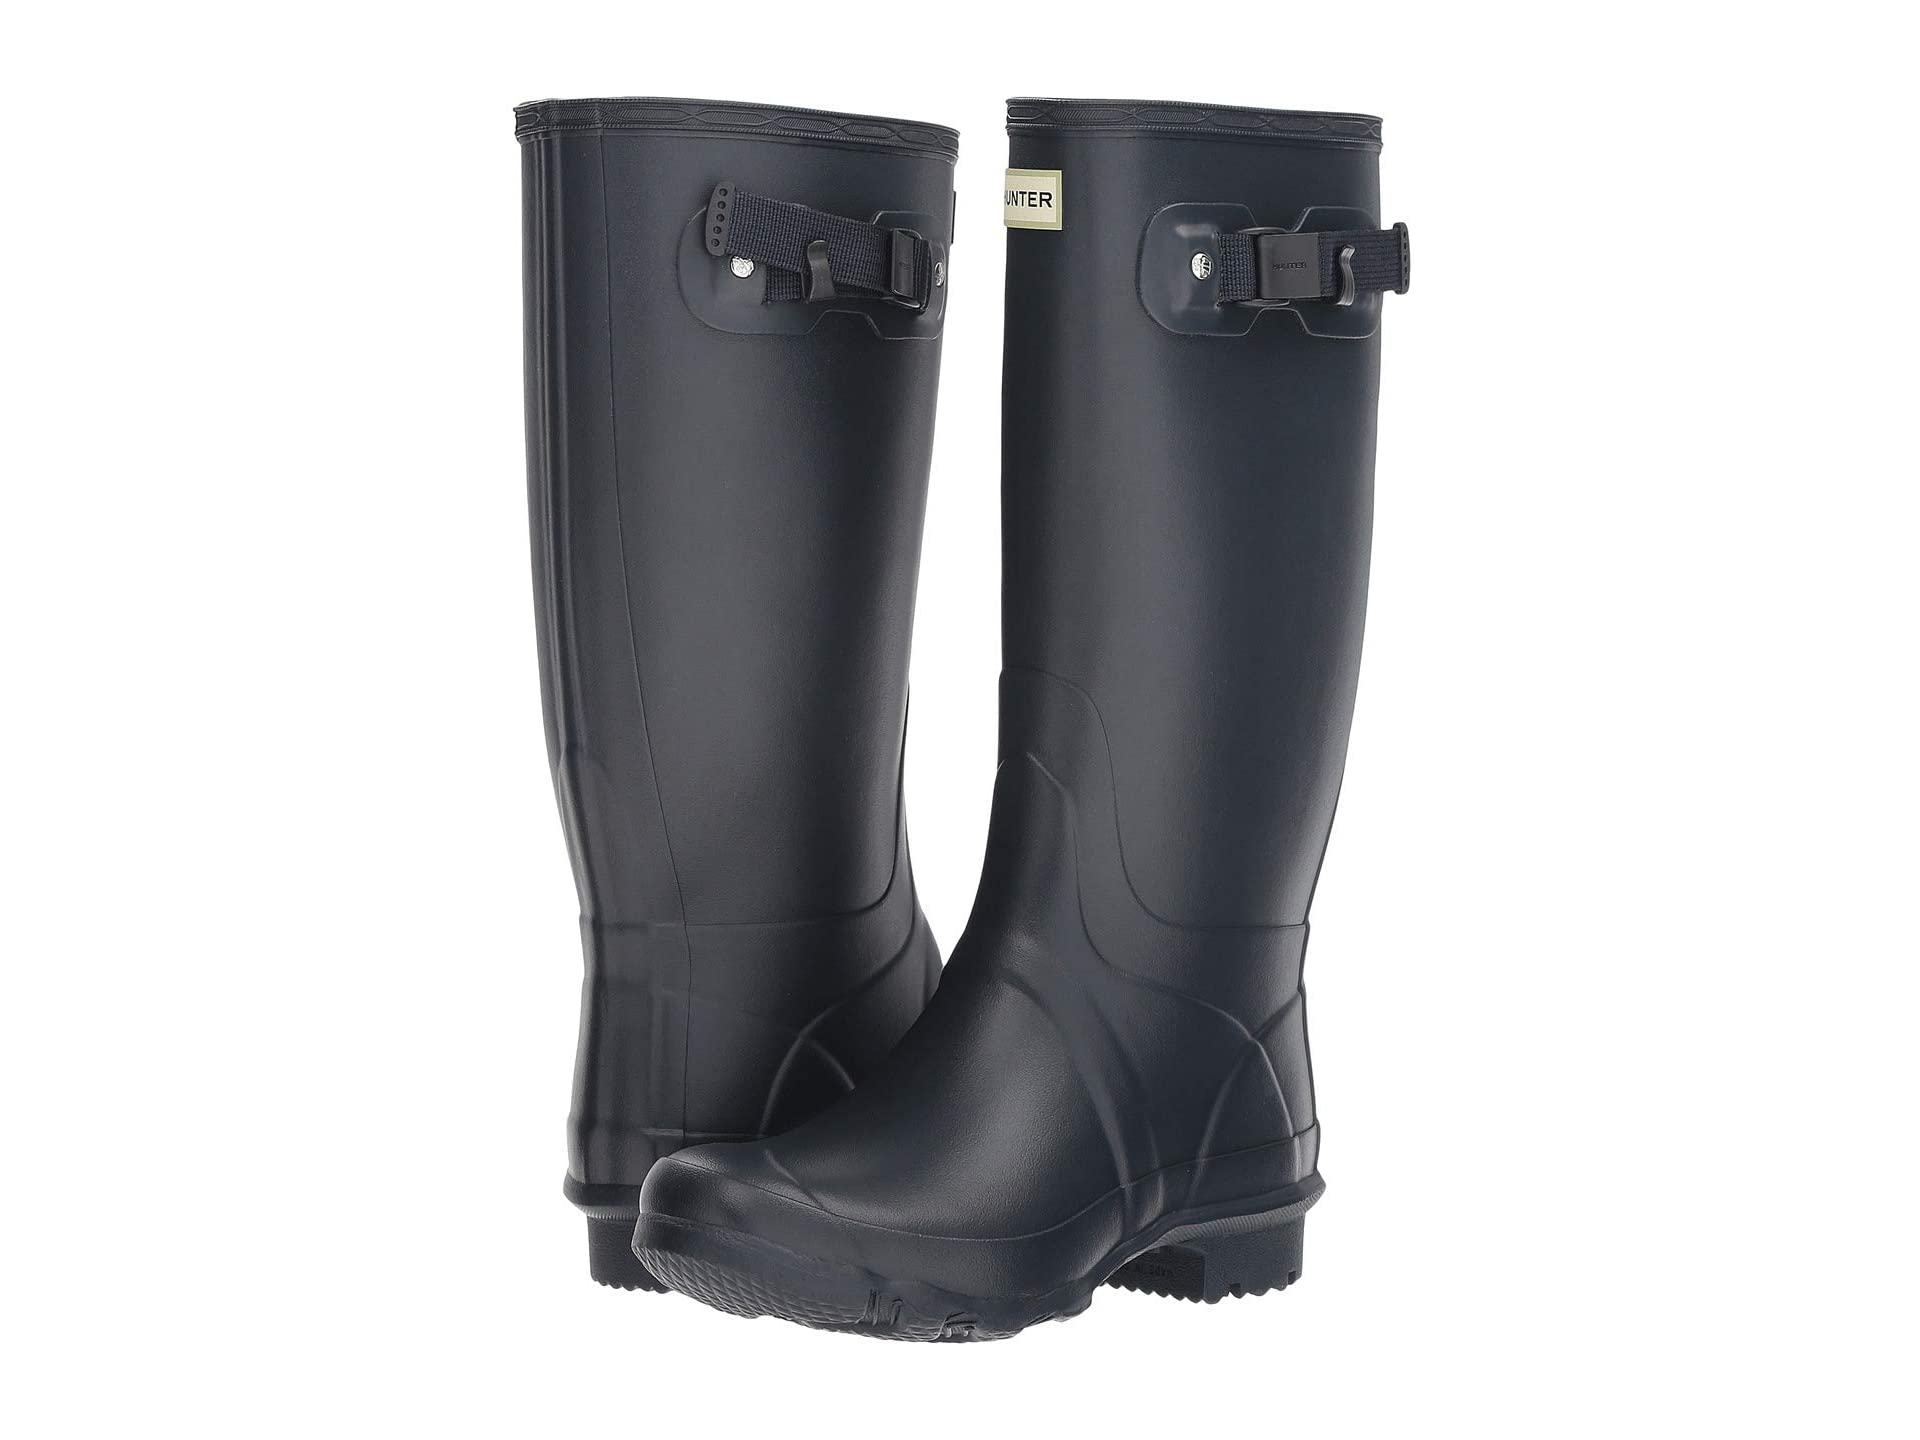 Womens Wellies: Best Wellington Boots For Rain Or Shine